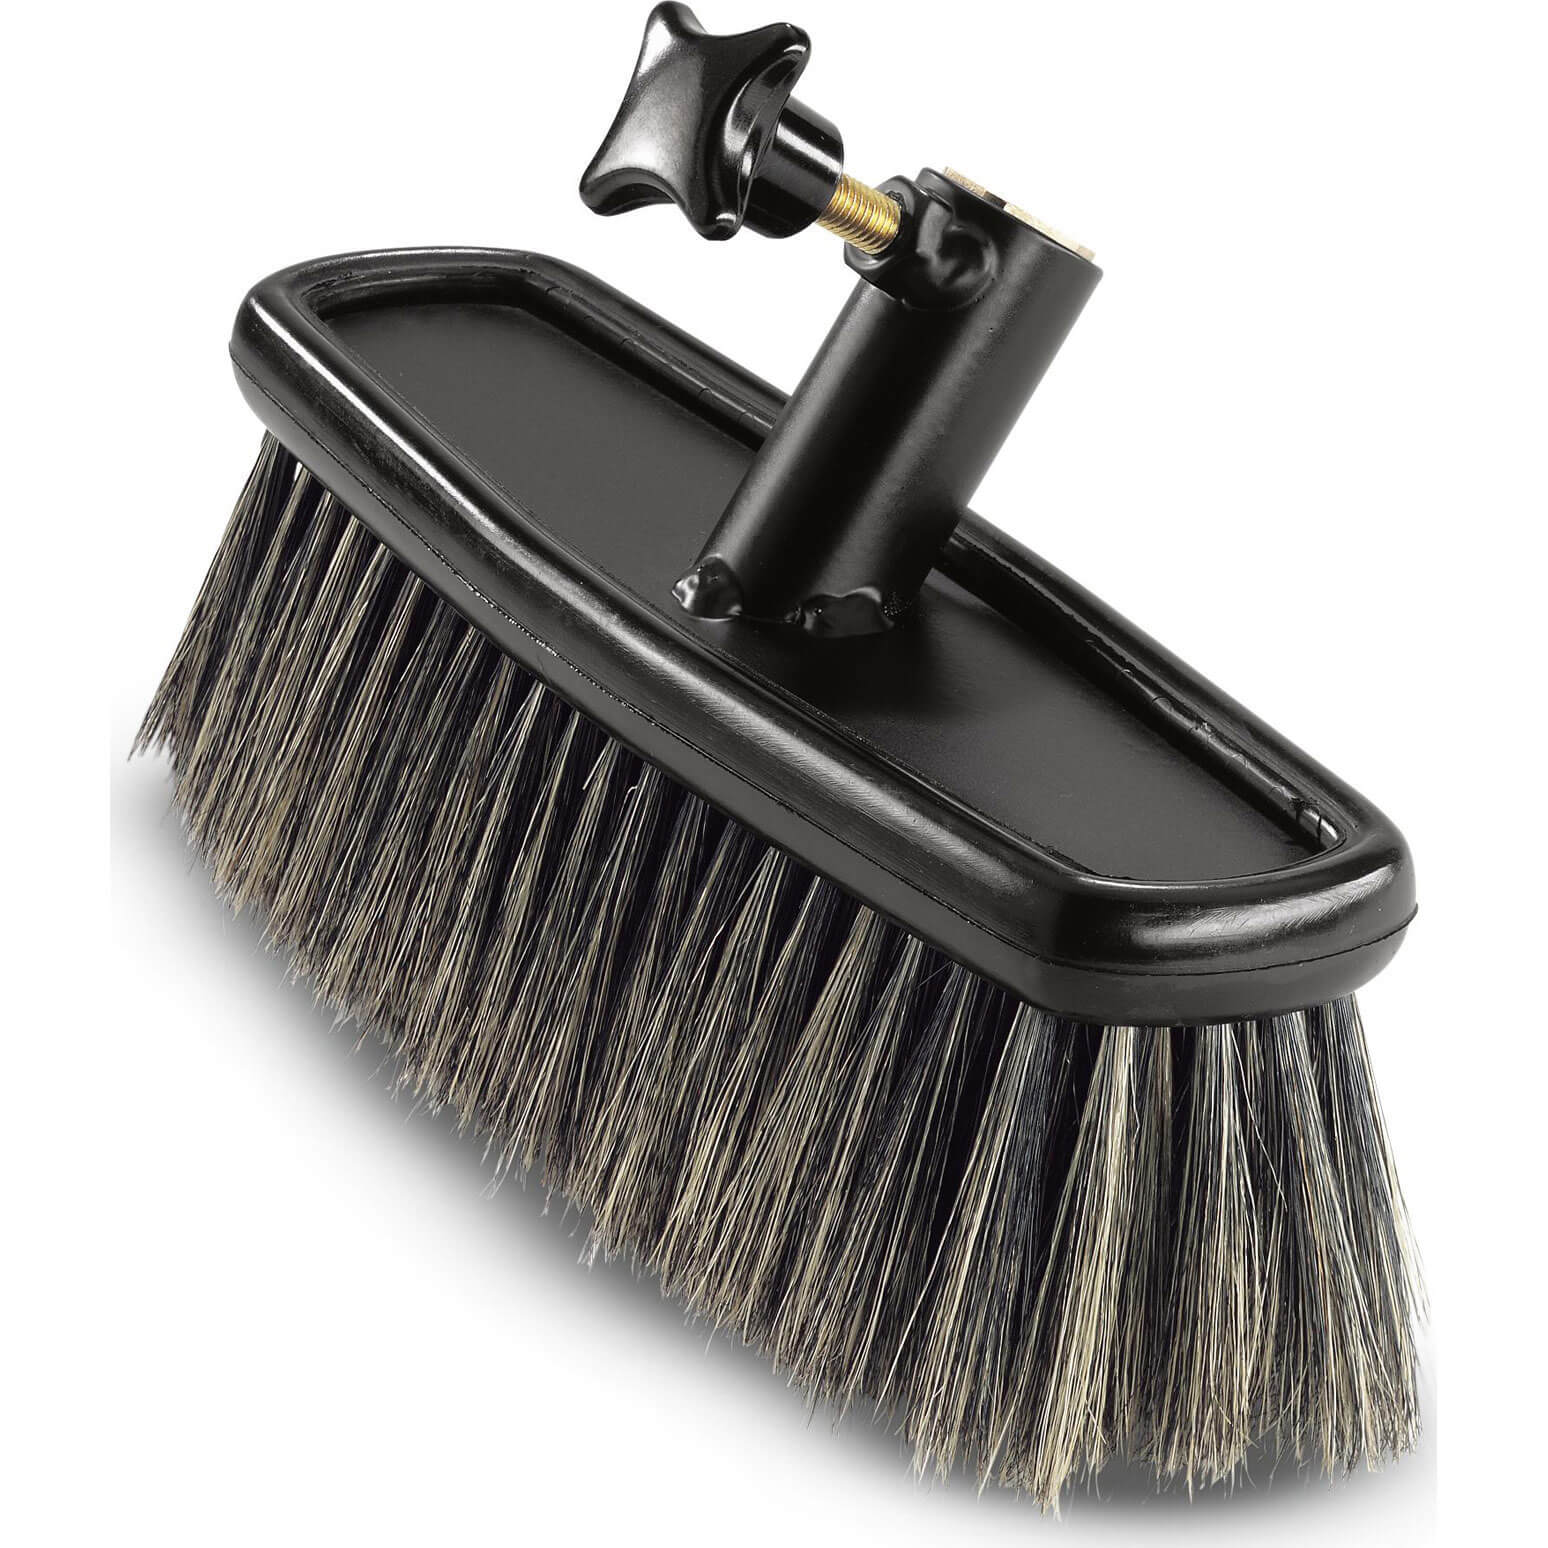 Image of Karcher Basic Natural Wash Brush for HD and XPERT Pressure Washers (Not Easy!Lock)